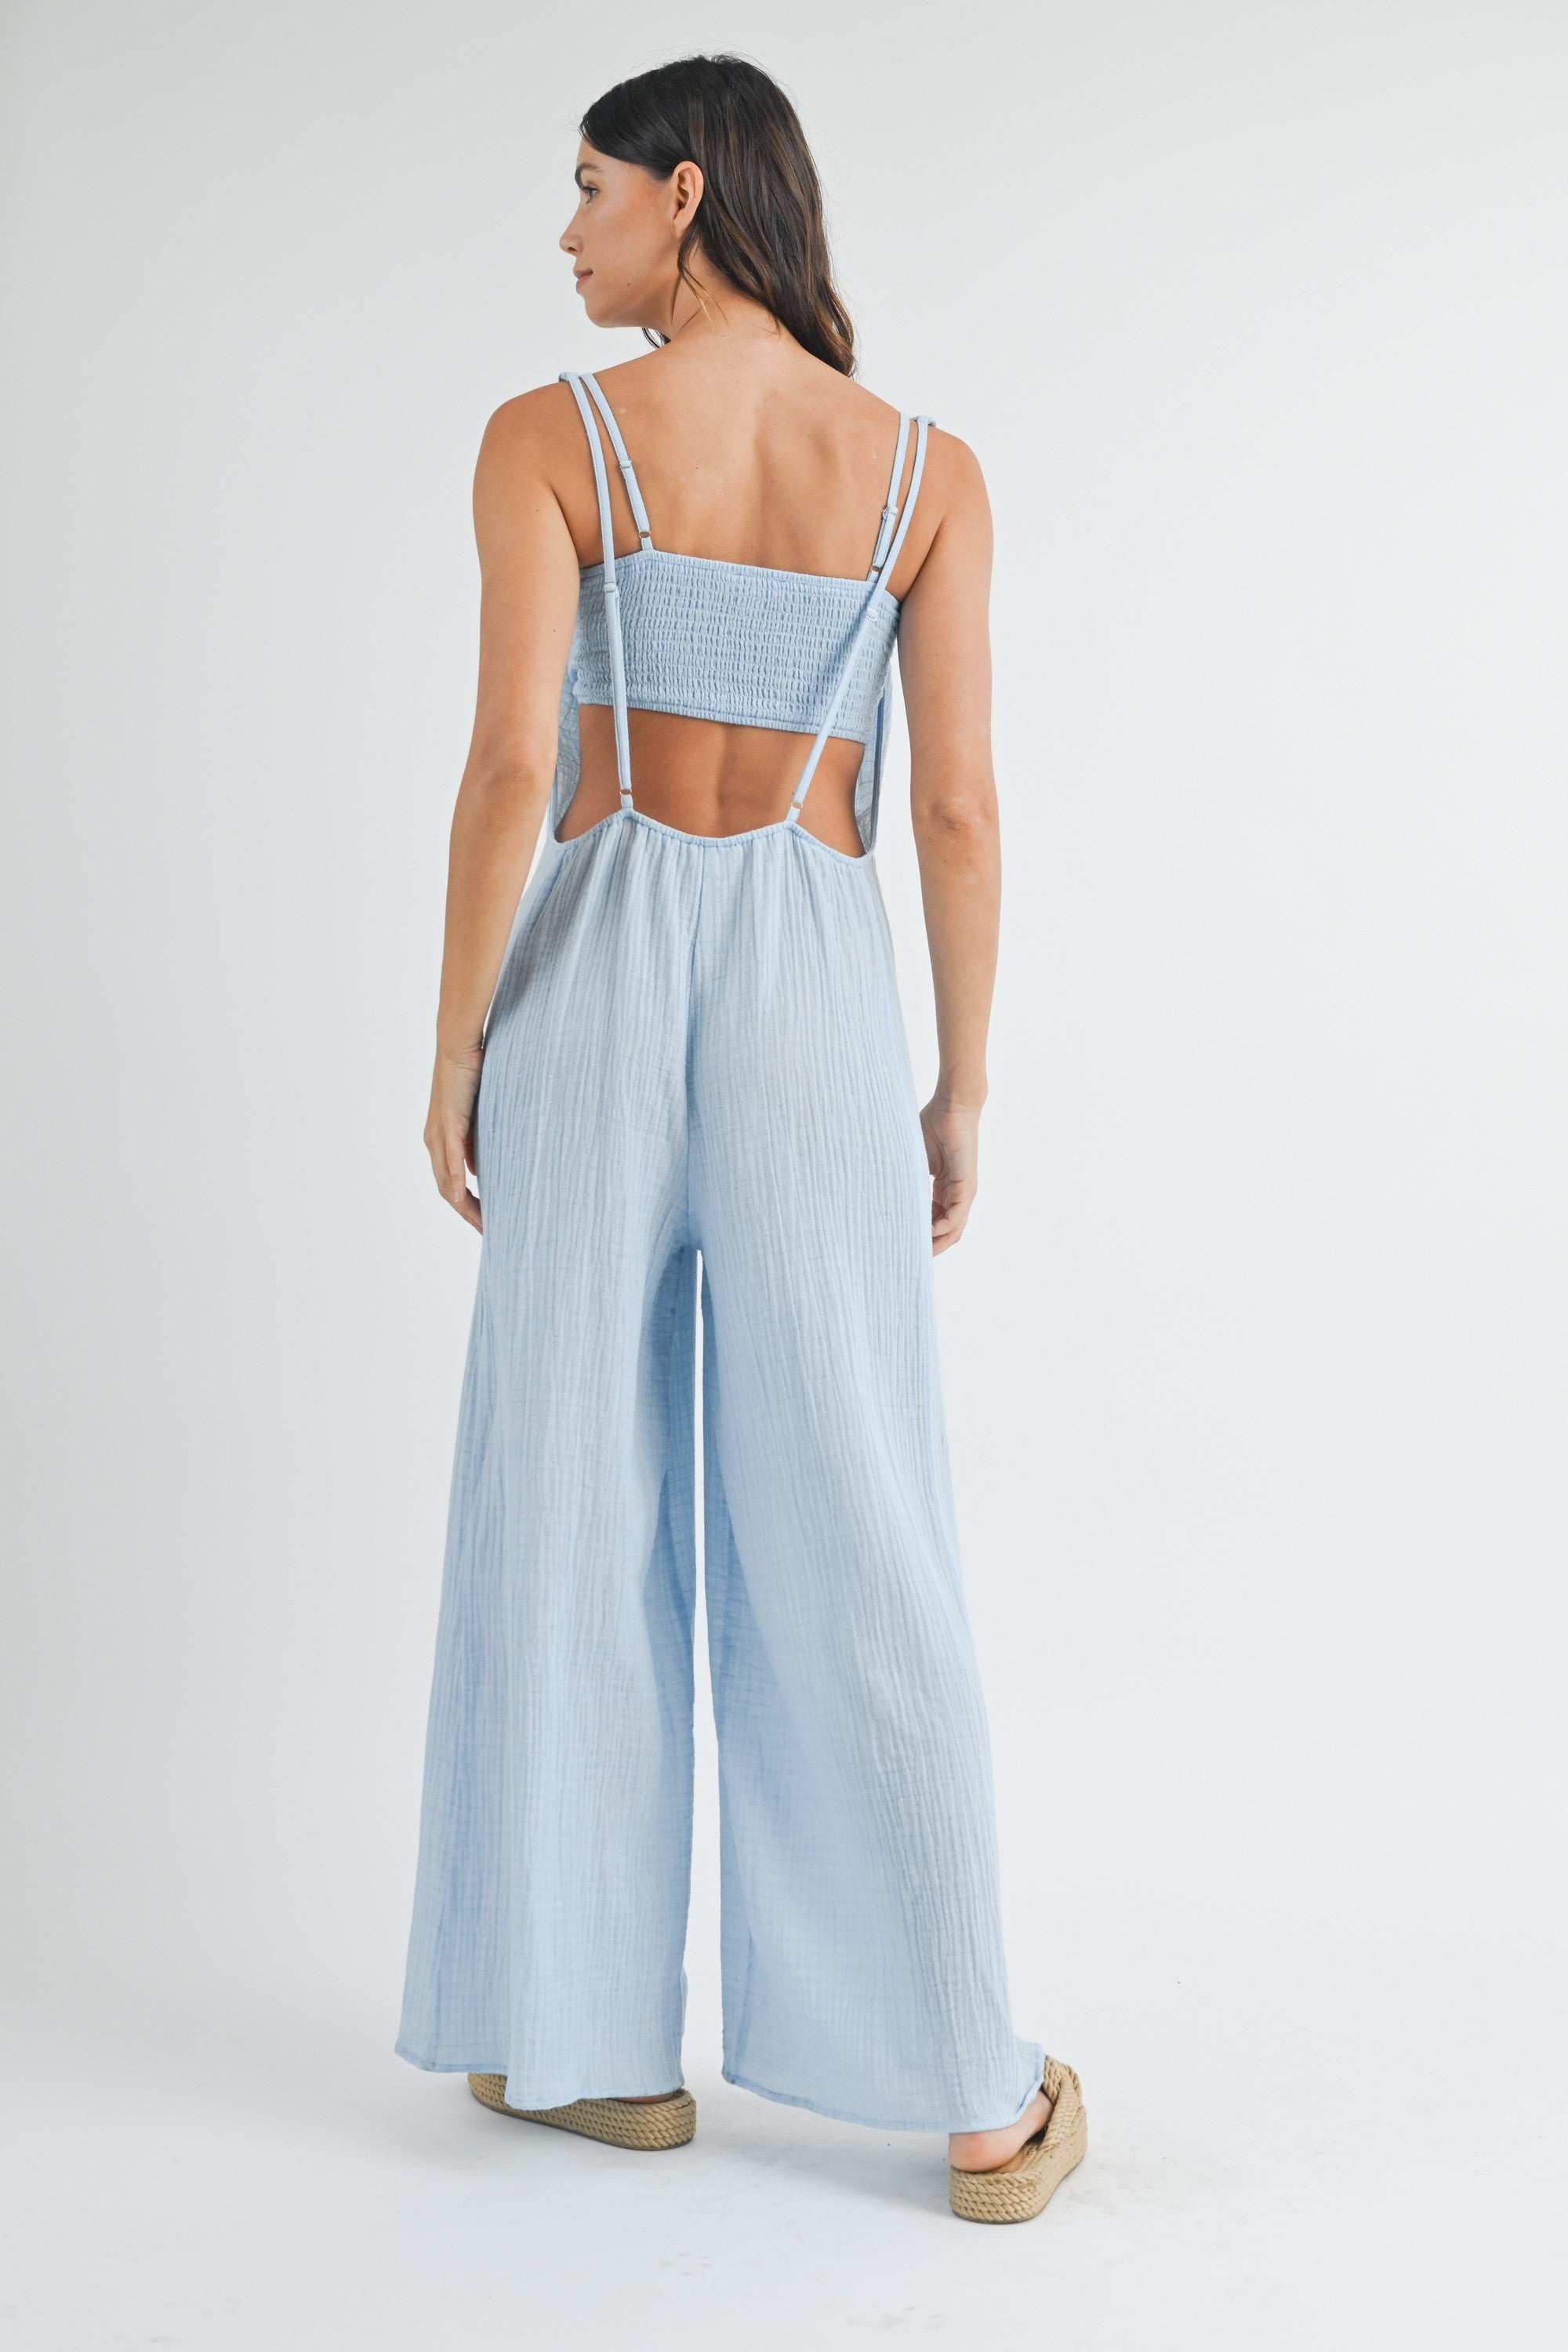 Bralette and Cami Jumpsuit Set | Collective Request 